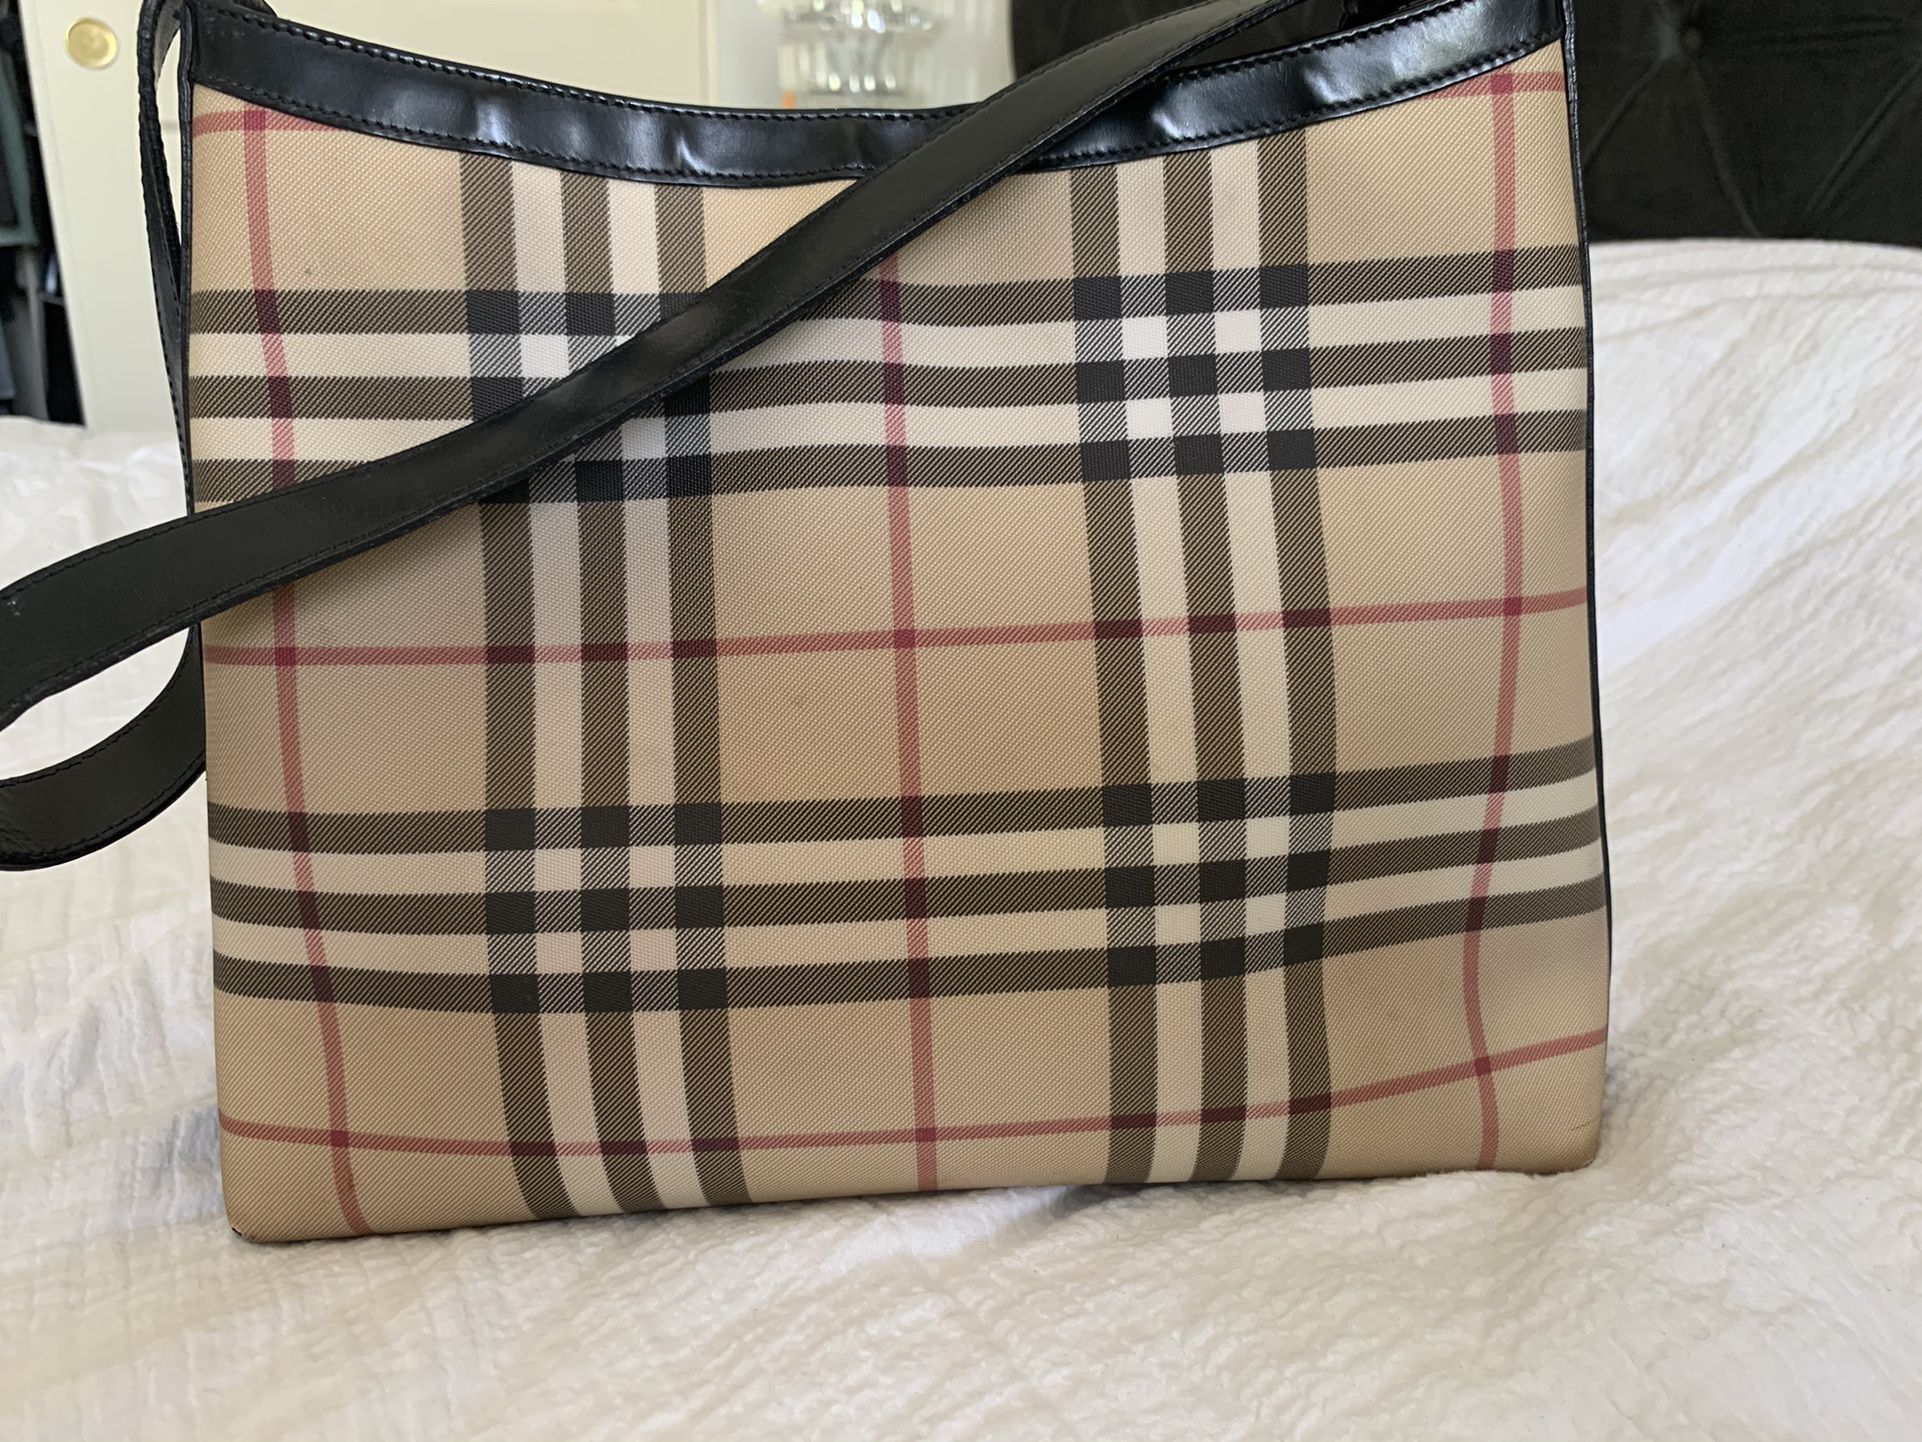 Authentic Vintage Burberry Bag for Sale in Elk Grove, CA - OfferUp